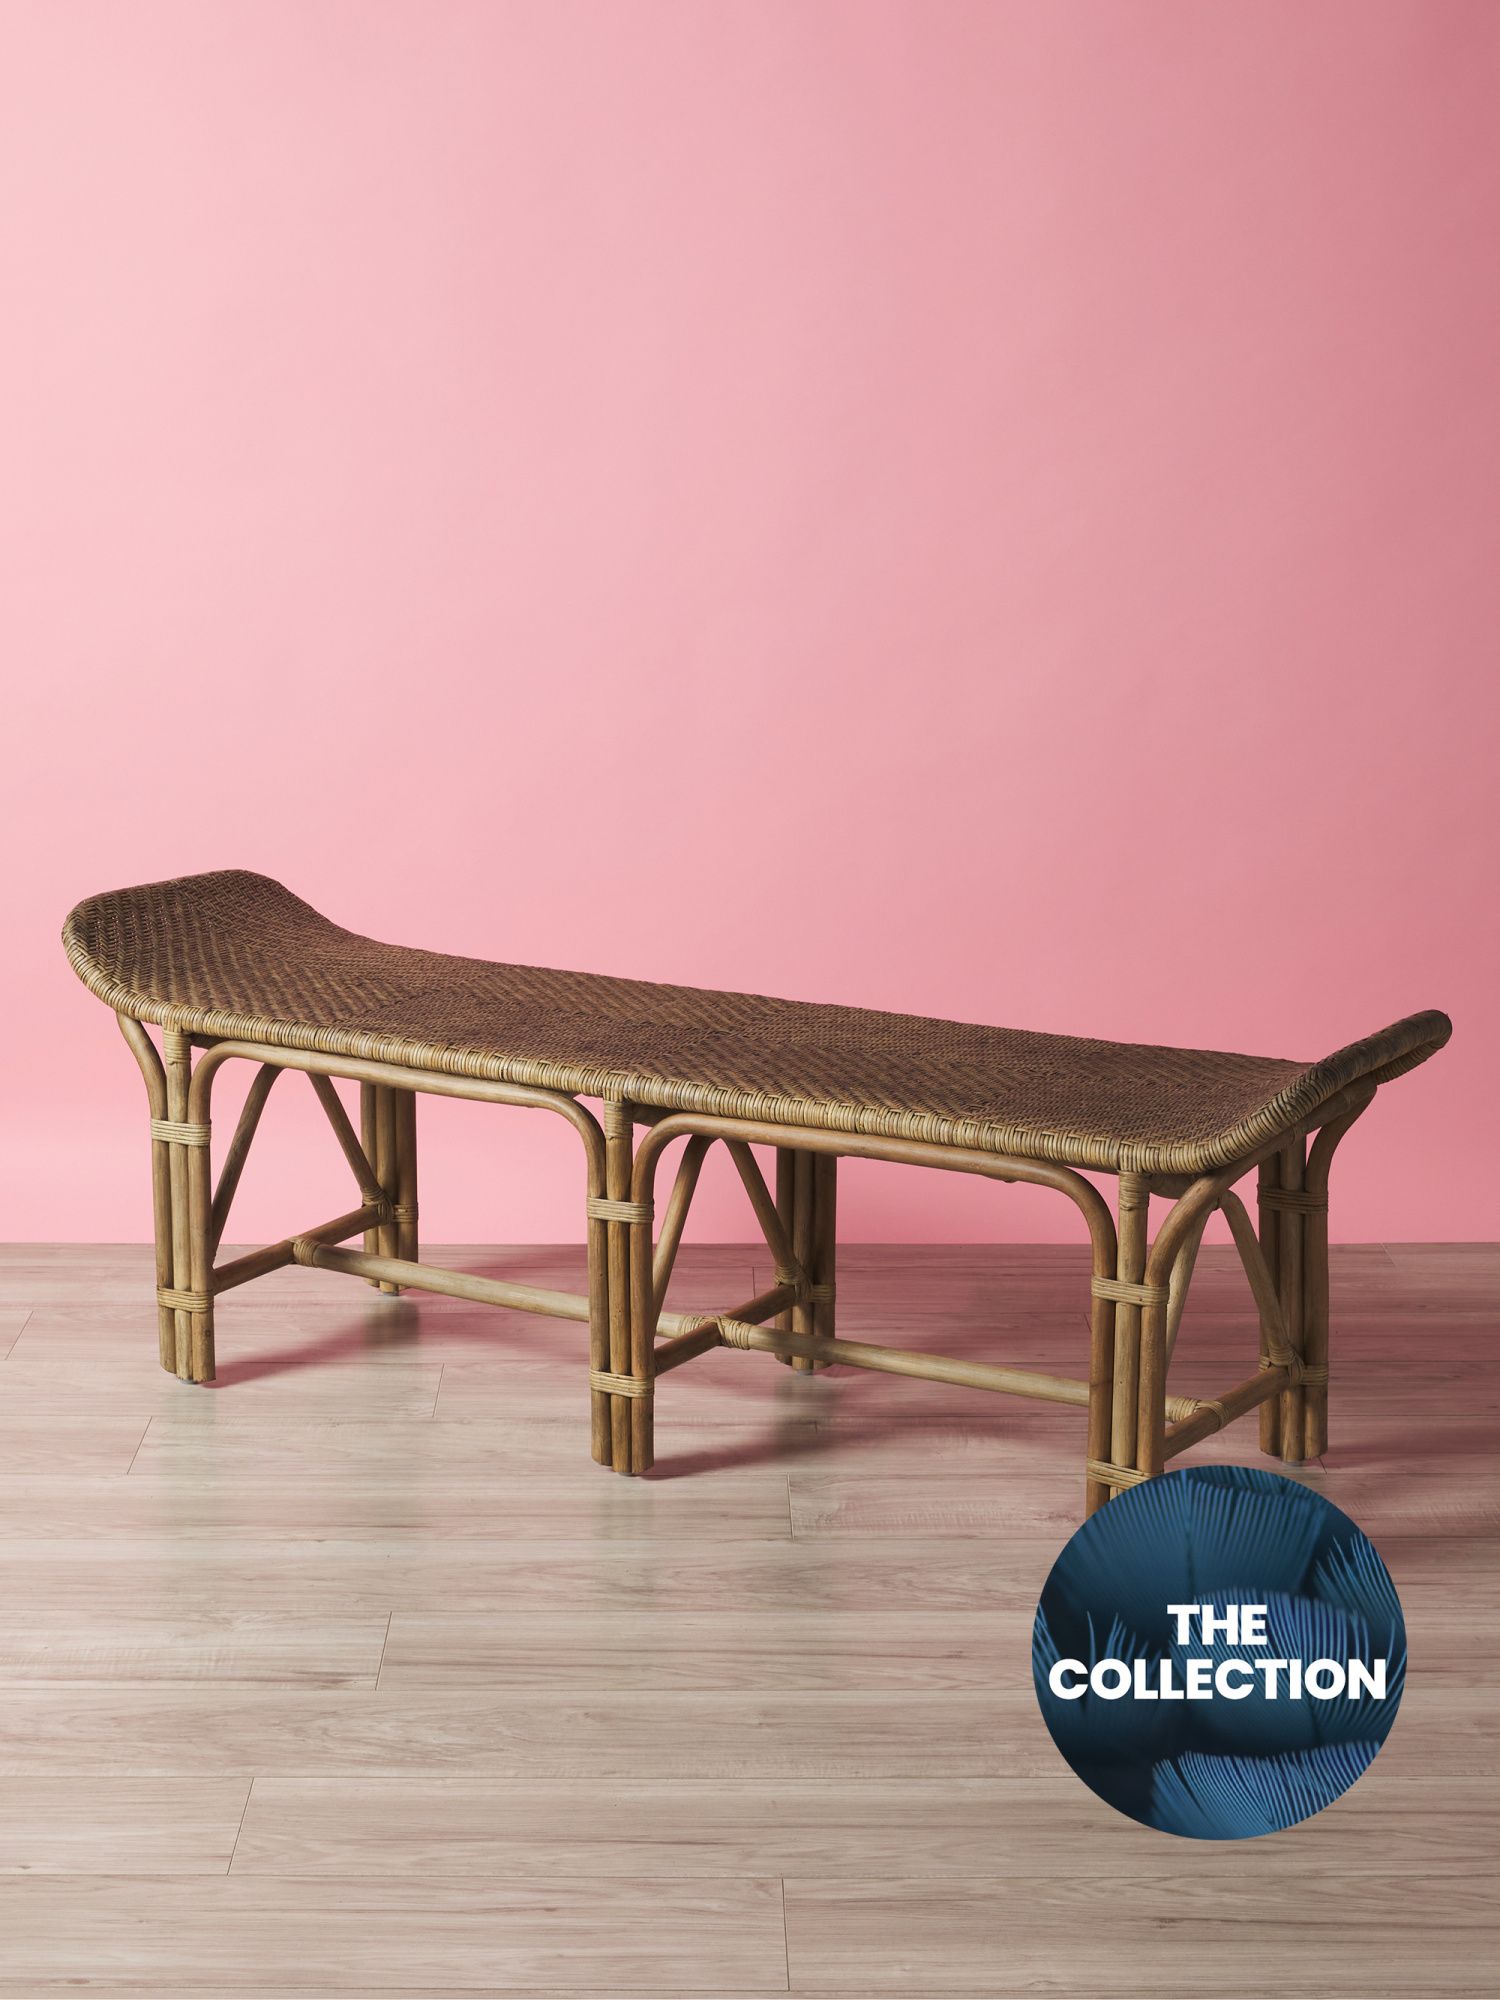 ARTERIORS
							
							Made In Indonesia 21x59 Woven Bench
						
						
							

	
		
						
	... | HomeGoods